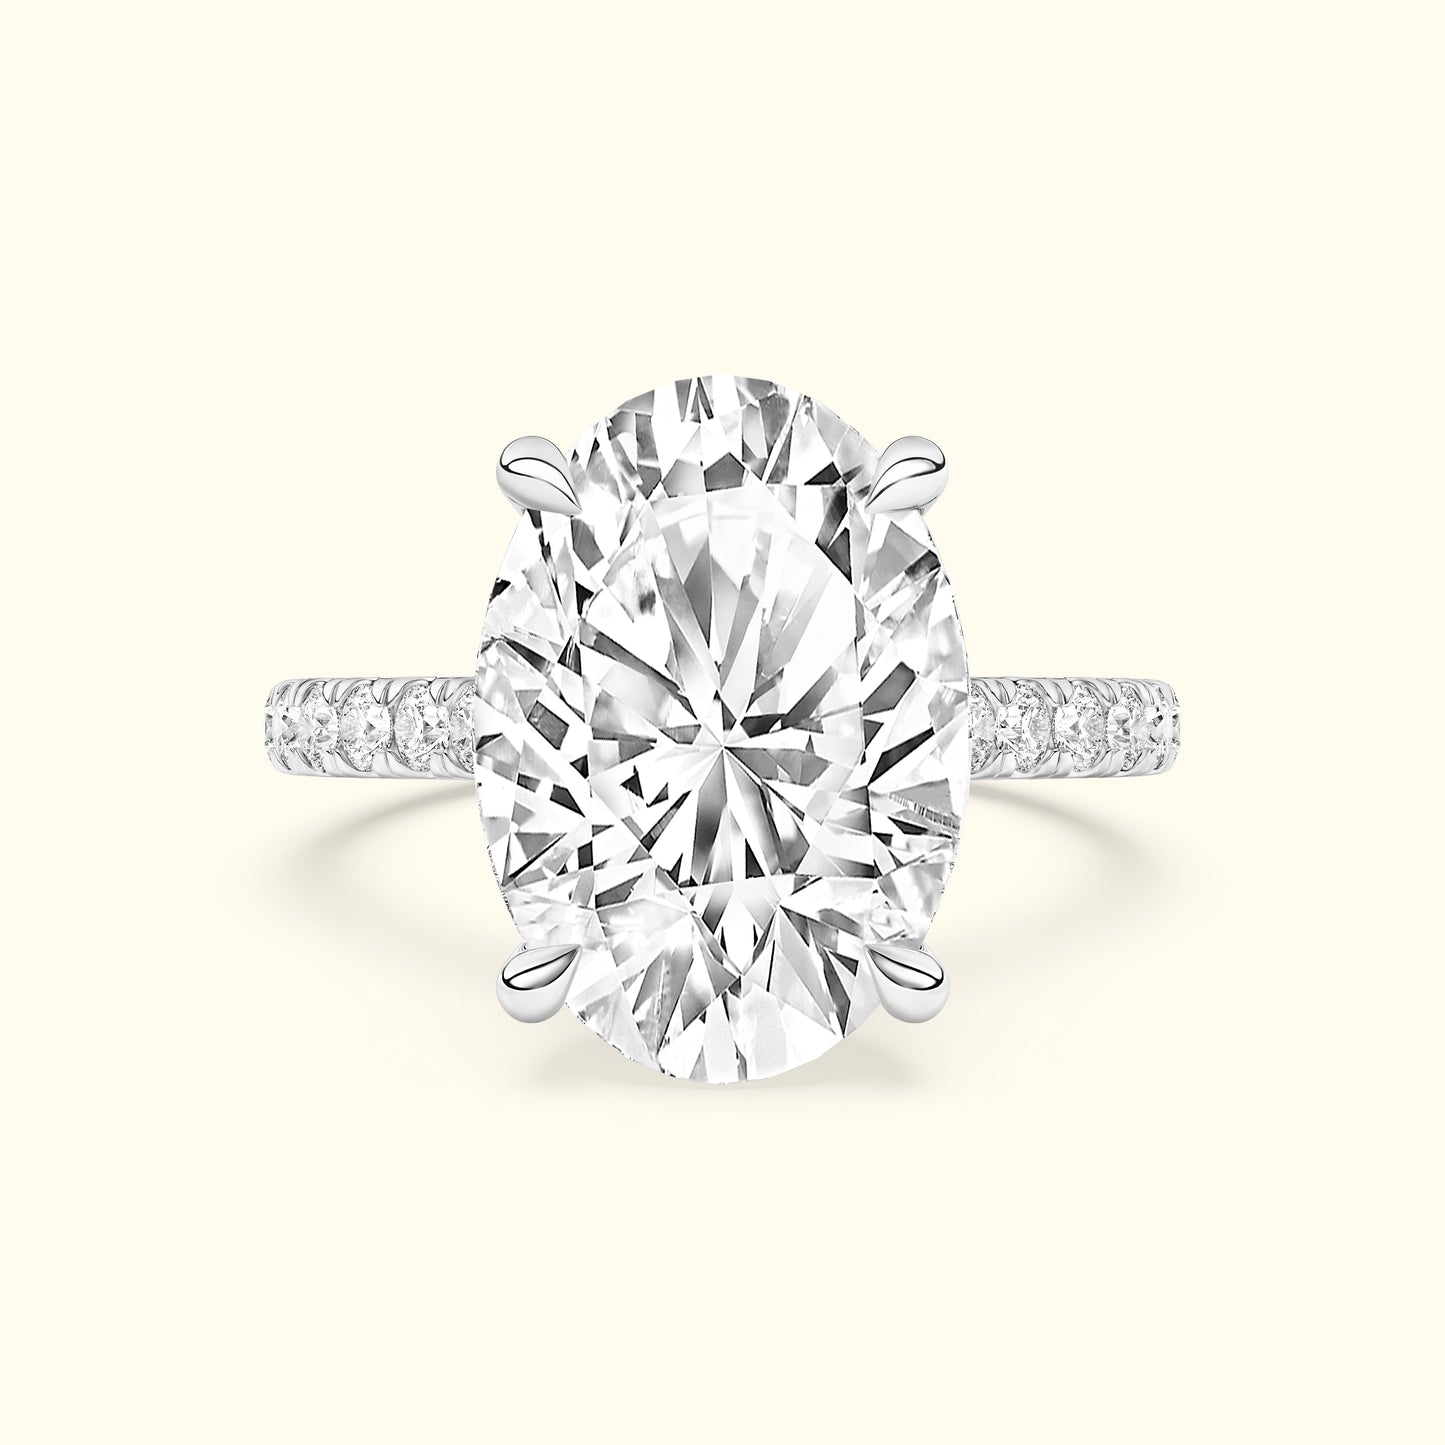 'Elizabeth' Ring with 5.07ct Oval Diamond